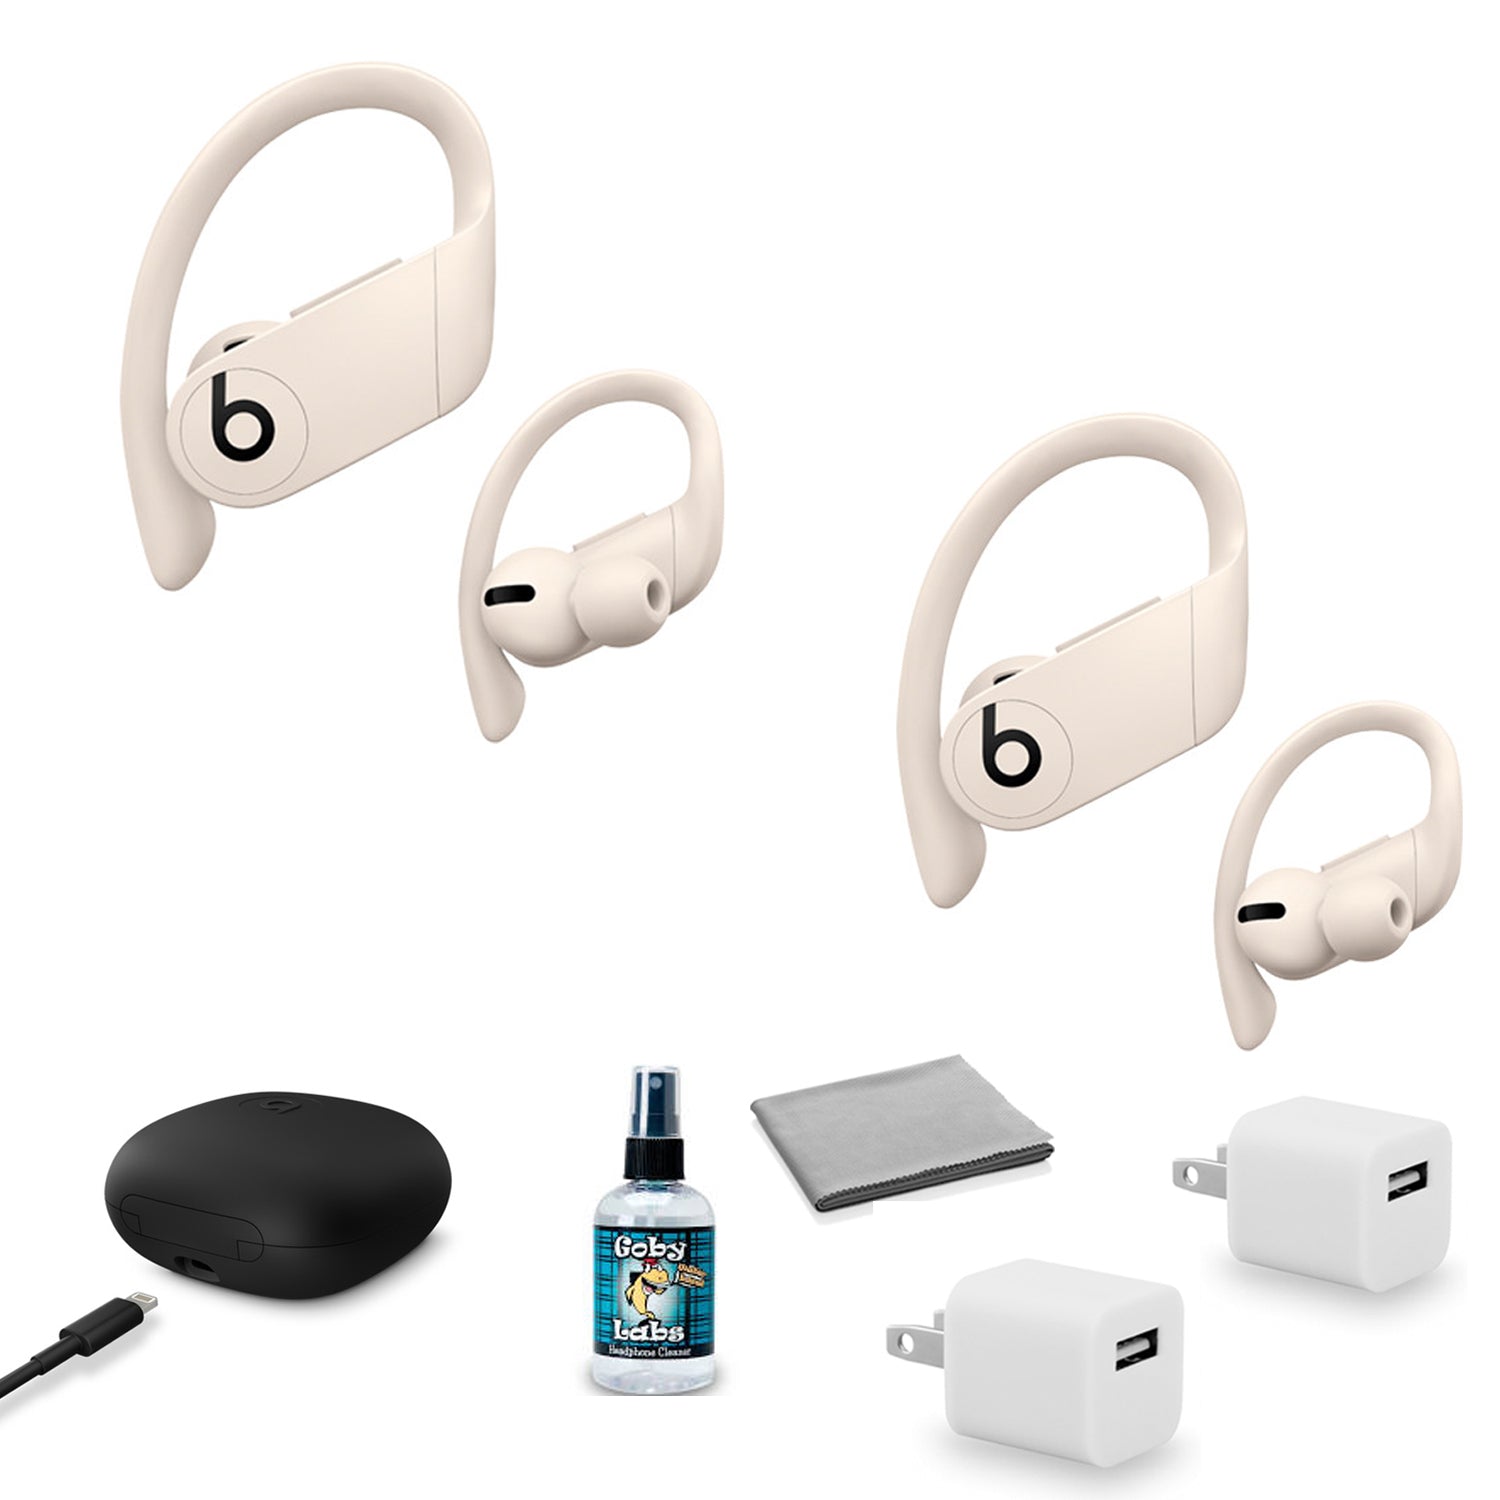 Beats by Dr. Dre Powerbeats Pro In-Ear Wireless Headphones (Ivory) MY5D2LL/A with Headphone Cleaner + More